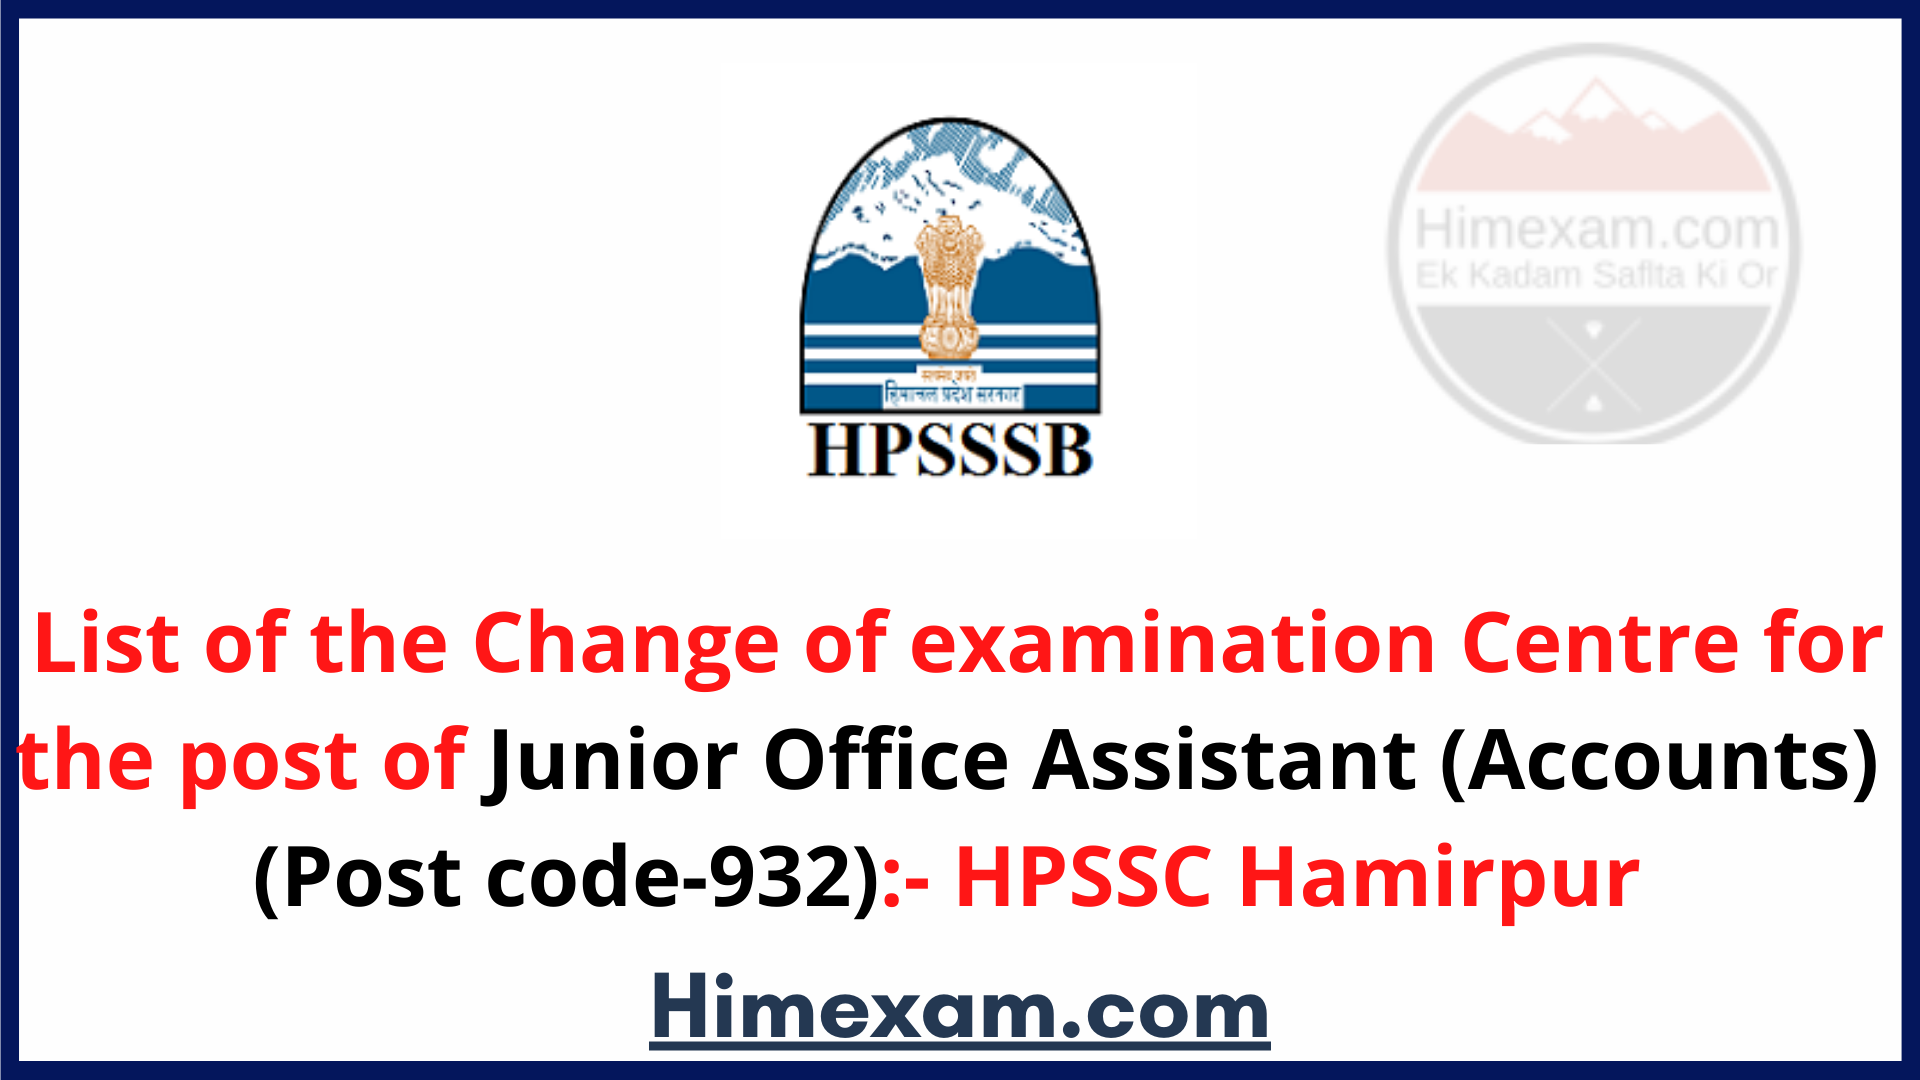 List of the Change of examination Centre for the post of Junior Office Assistant (Accounts) (Post code-932):- HPSSC Hamirpur